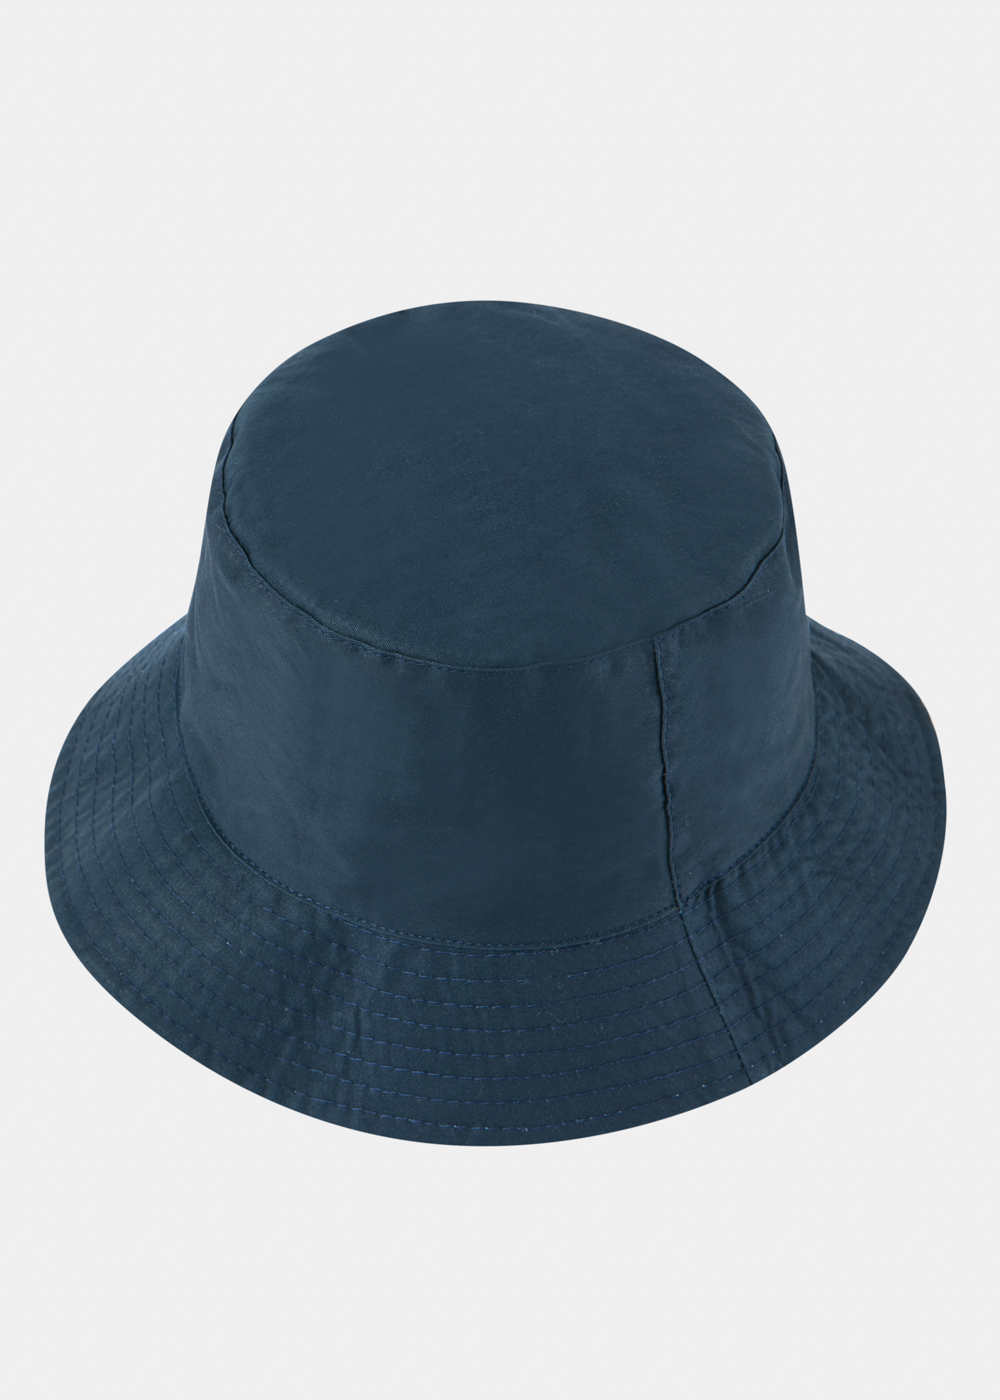 Double-Faced Bucket Hat Squares Pattern & Royal blue